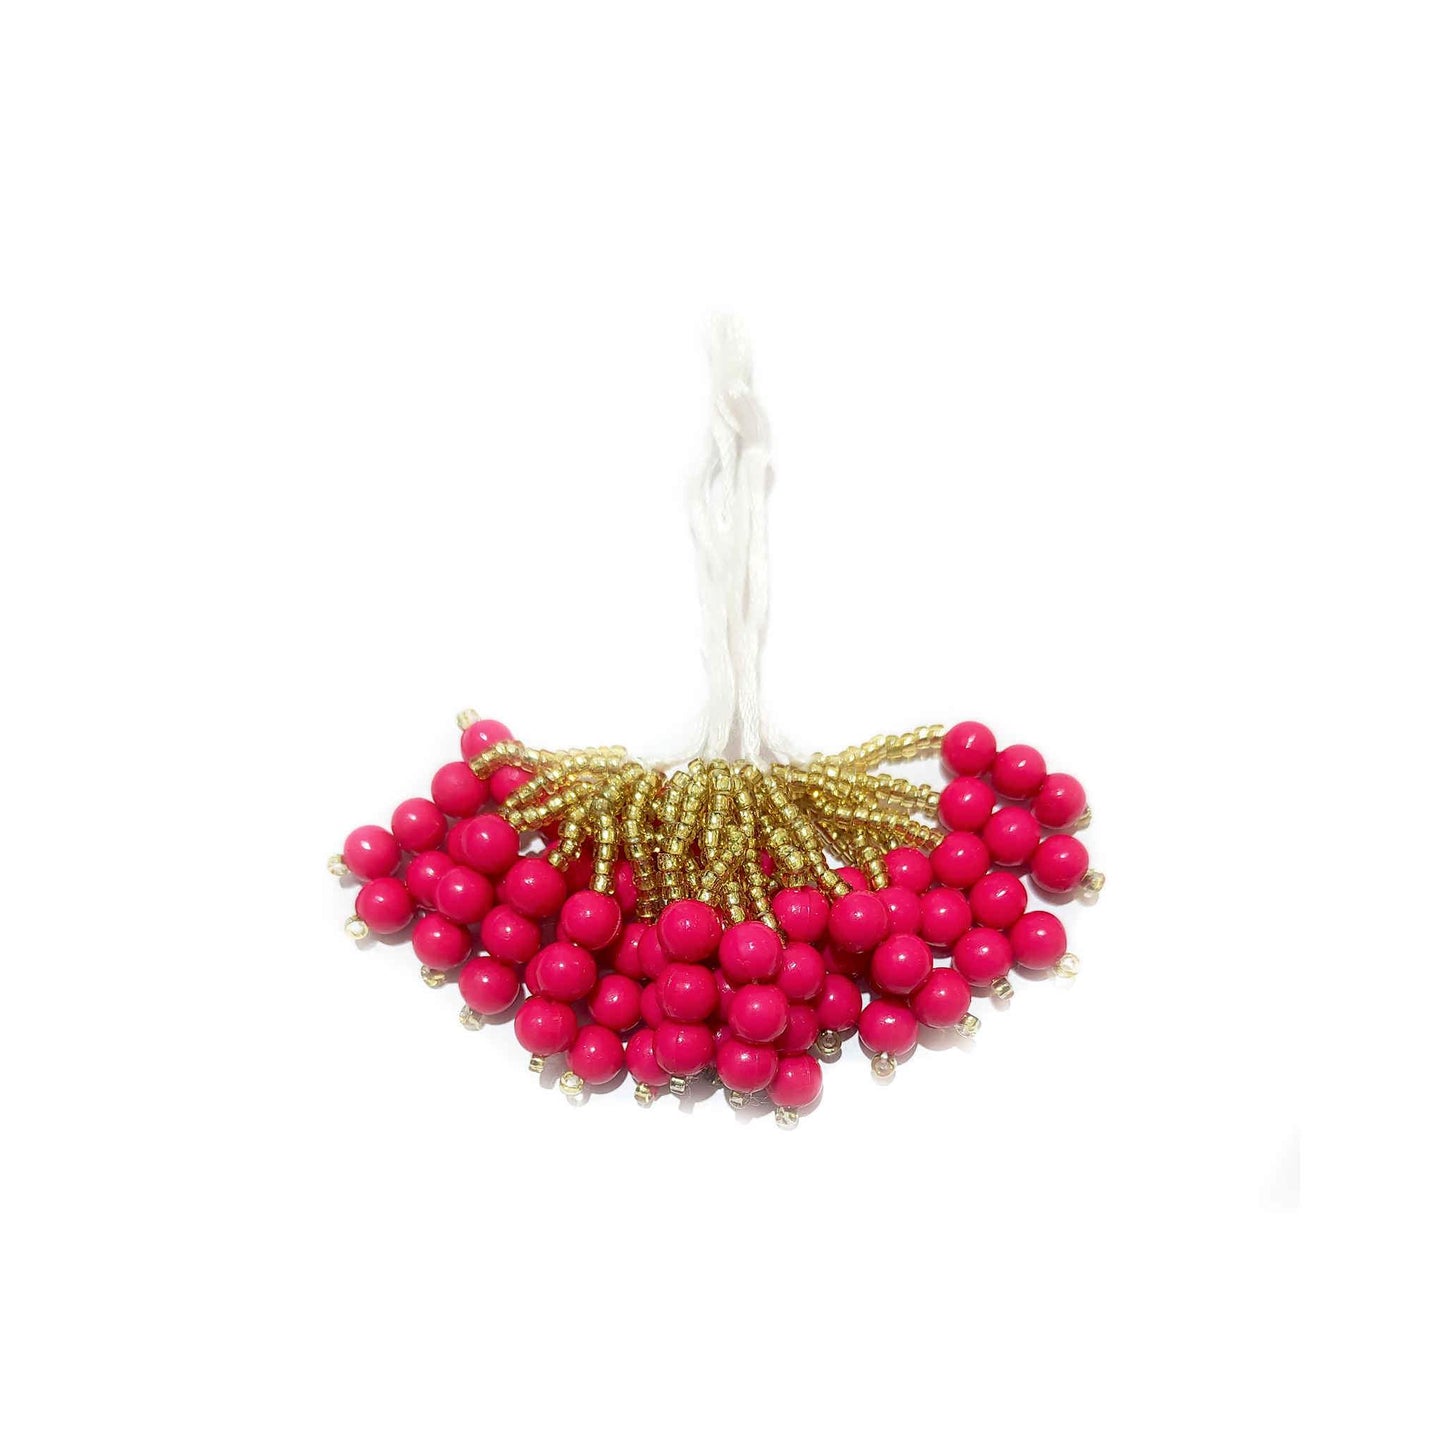 Indian Petals Handmade Beaded Thread Fringe Tassel with Cheed for Craft, Jewelry or Dressing - Design 845, Crimson